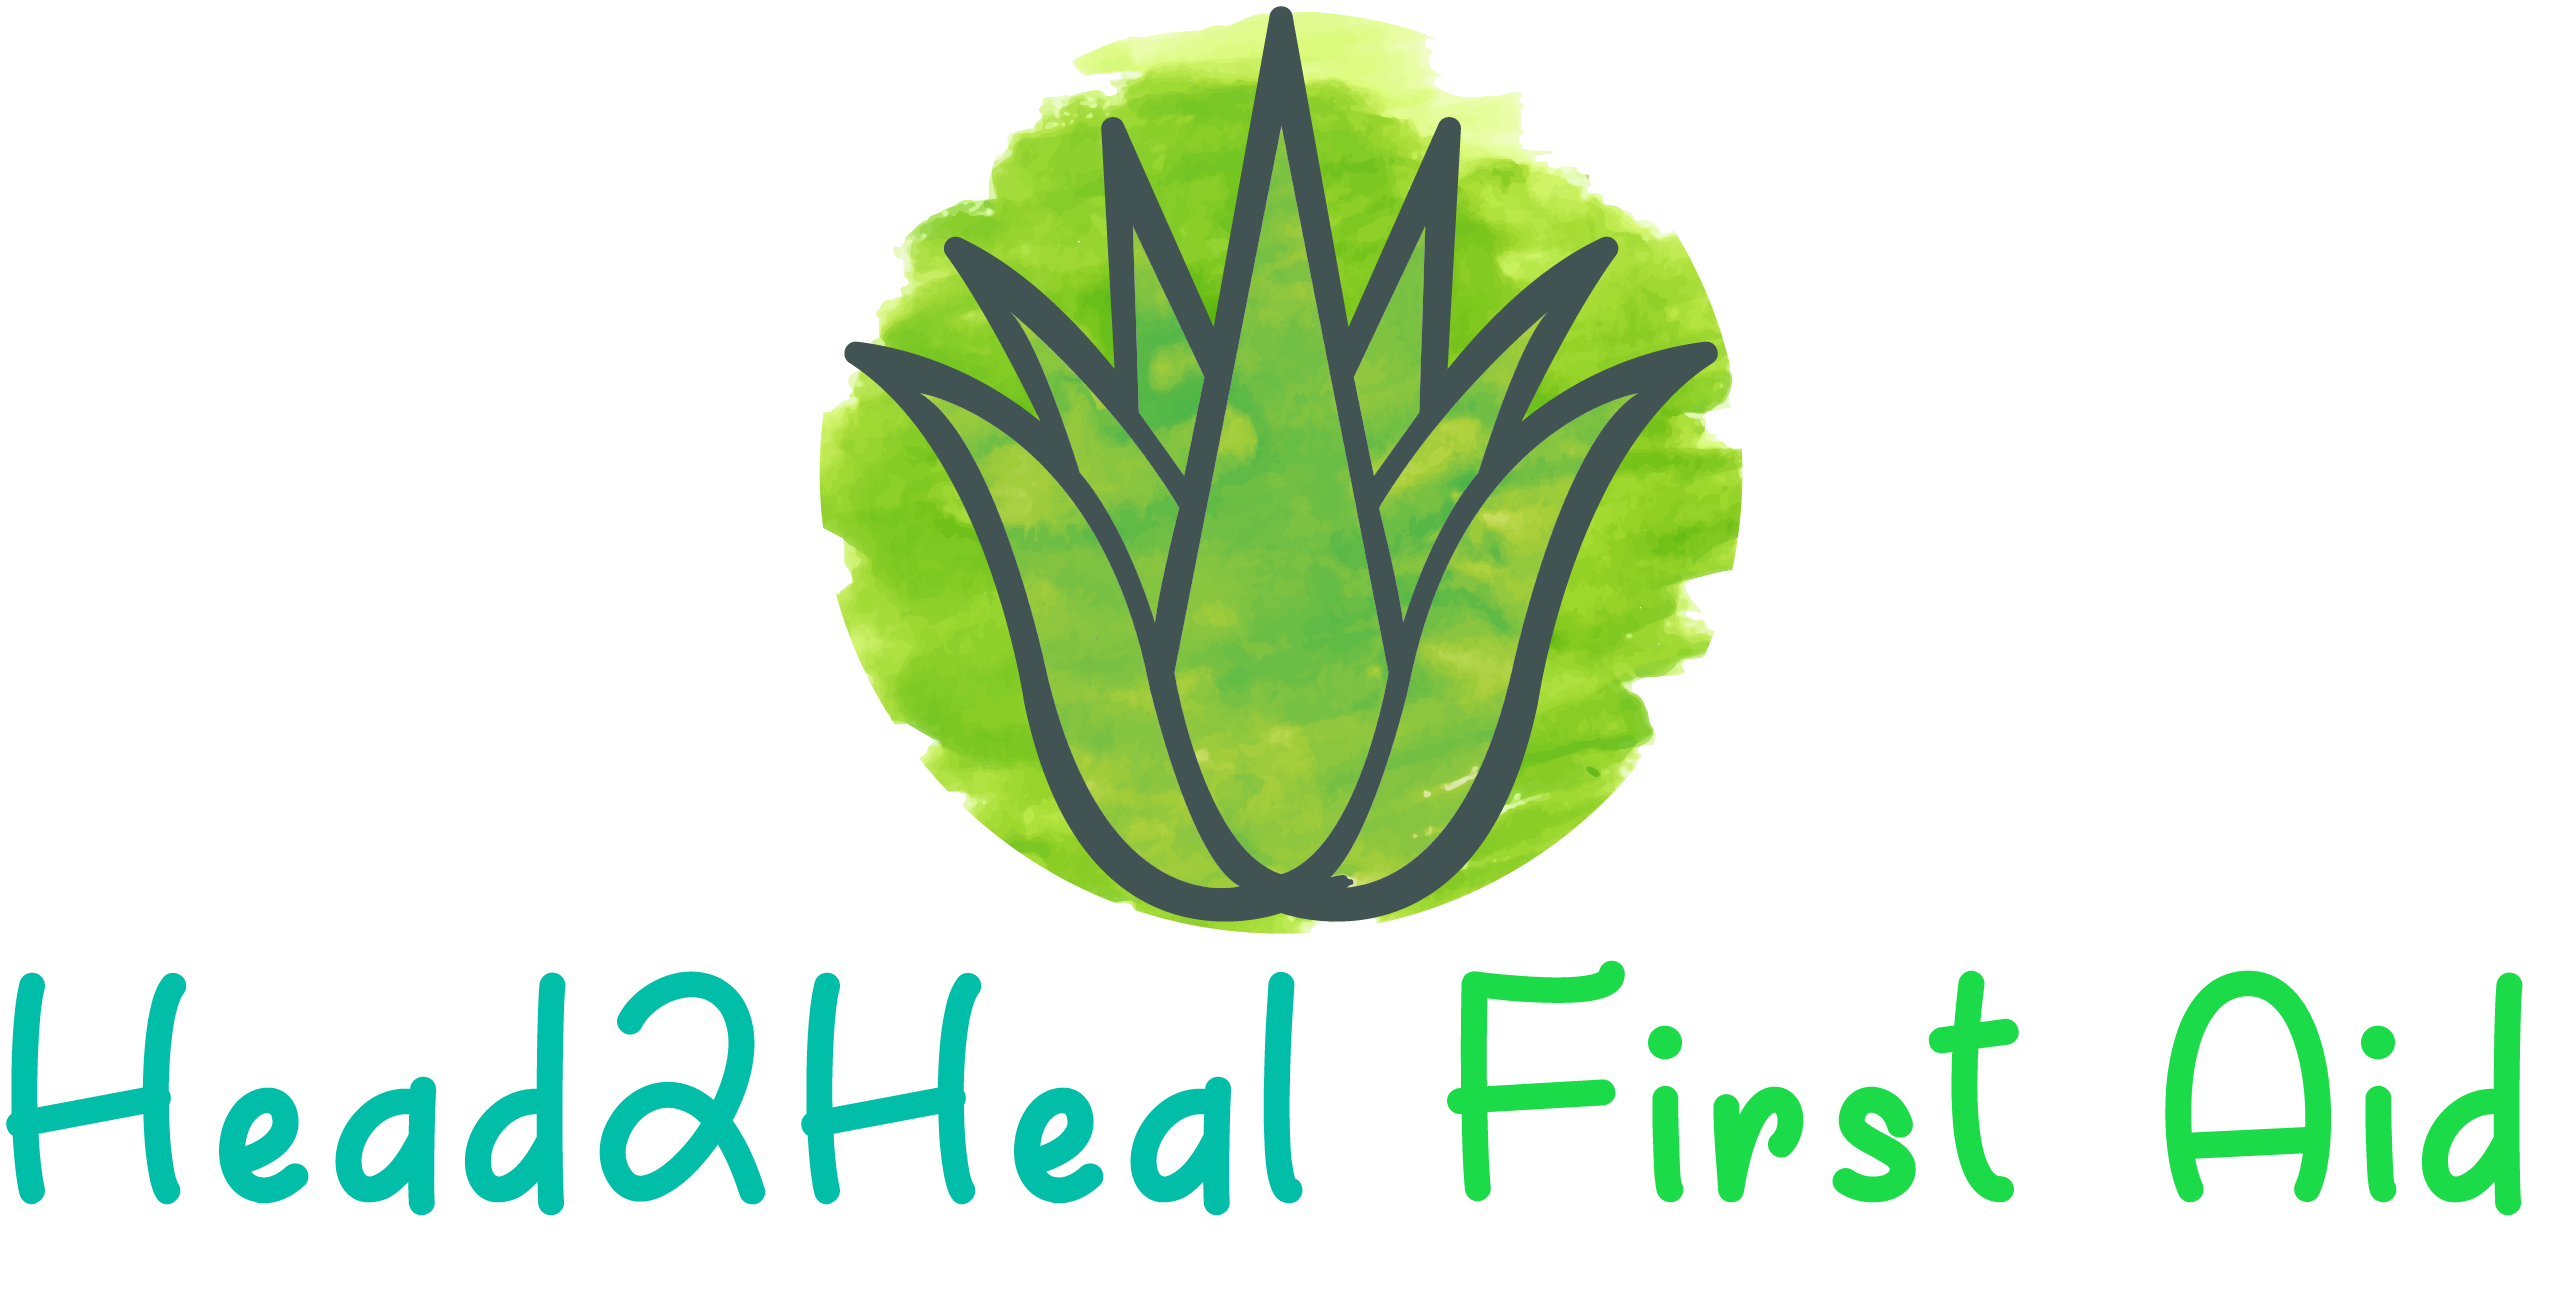 Logo of Head2Heal First Aid First Aid Training In Stourbridge, West Midlands